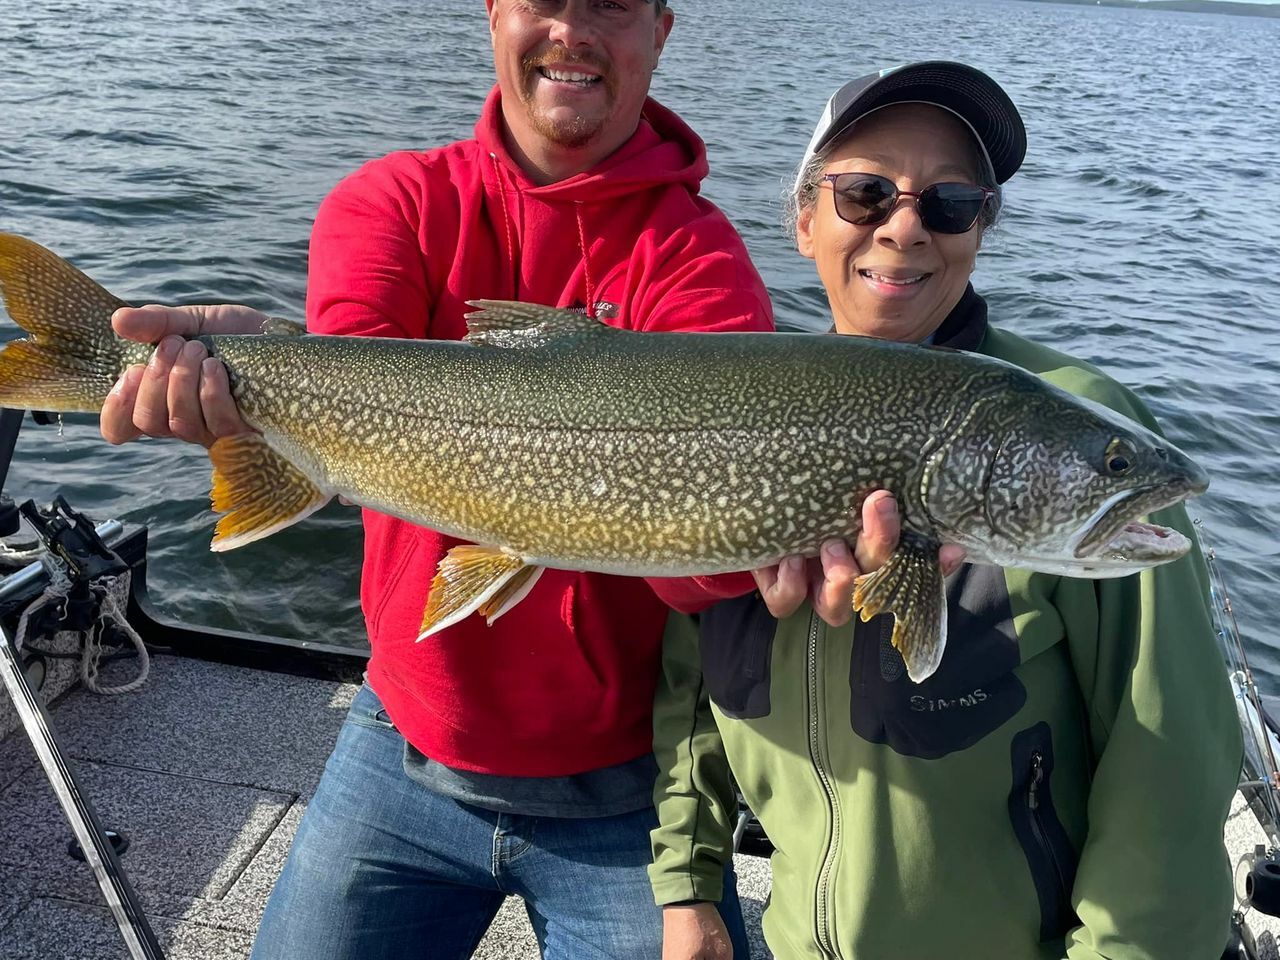 Lake Louise - Any day you hook 15 lake trout is a good day! - June 8, 2022